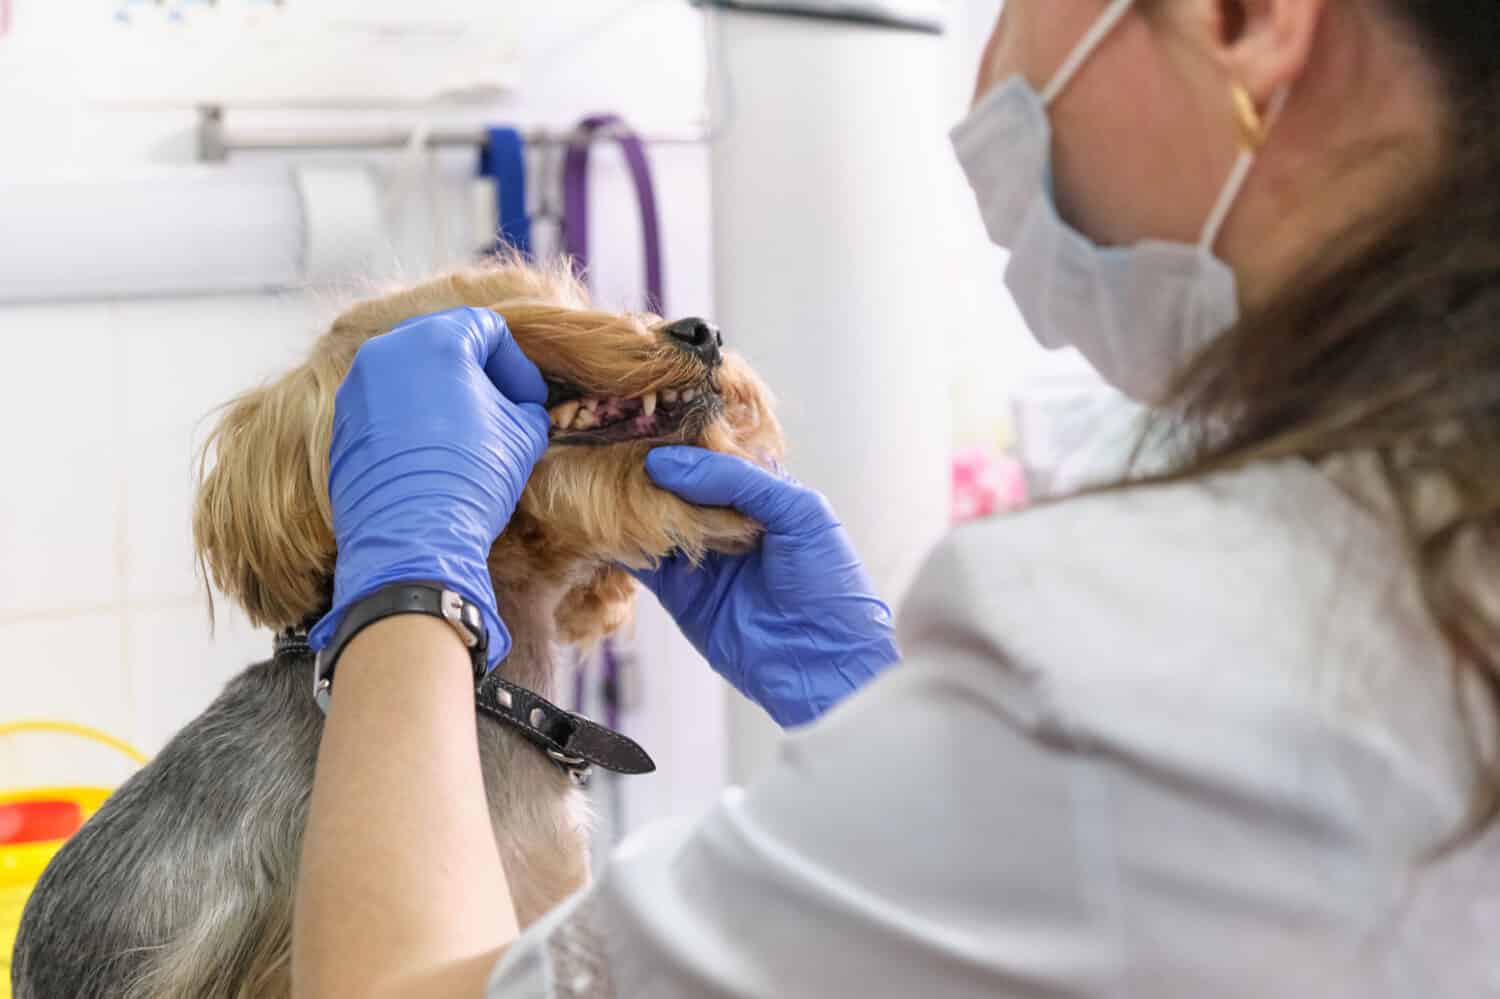 veterinarian examines a dog teeth. Consultation with a veterinarian. Close up of a dog and fangs. Animal clinic. Pet check up. Health care.